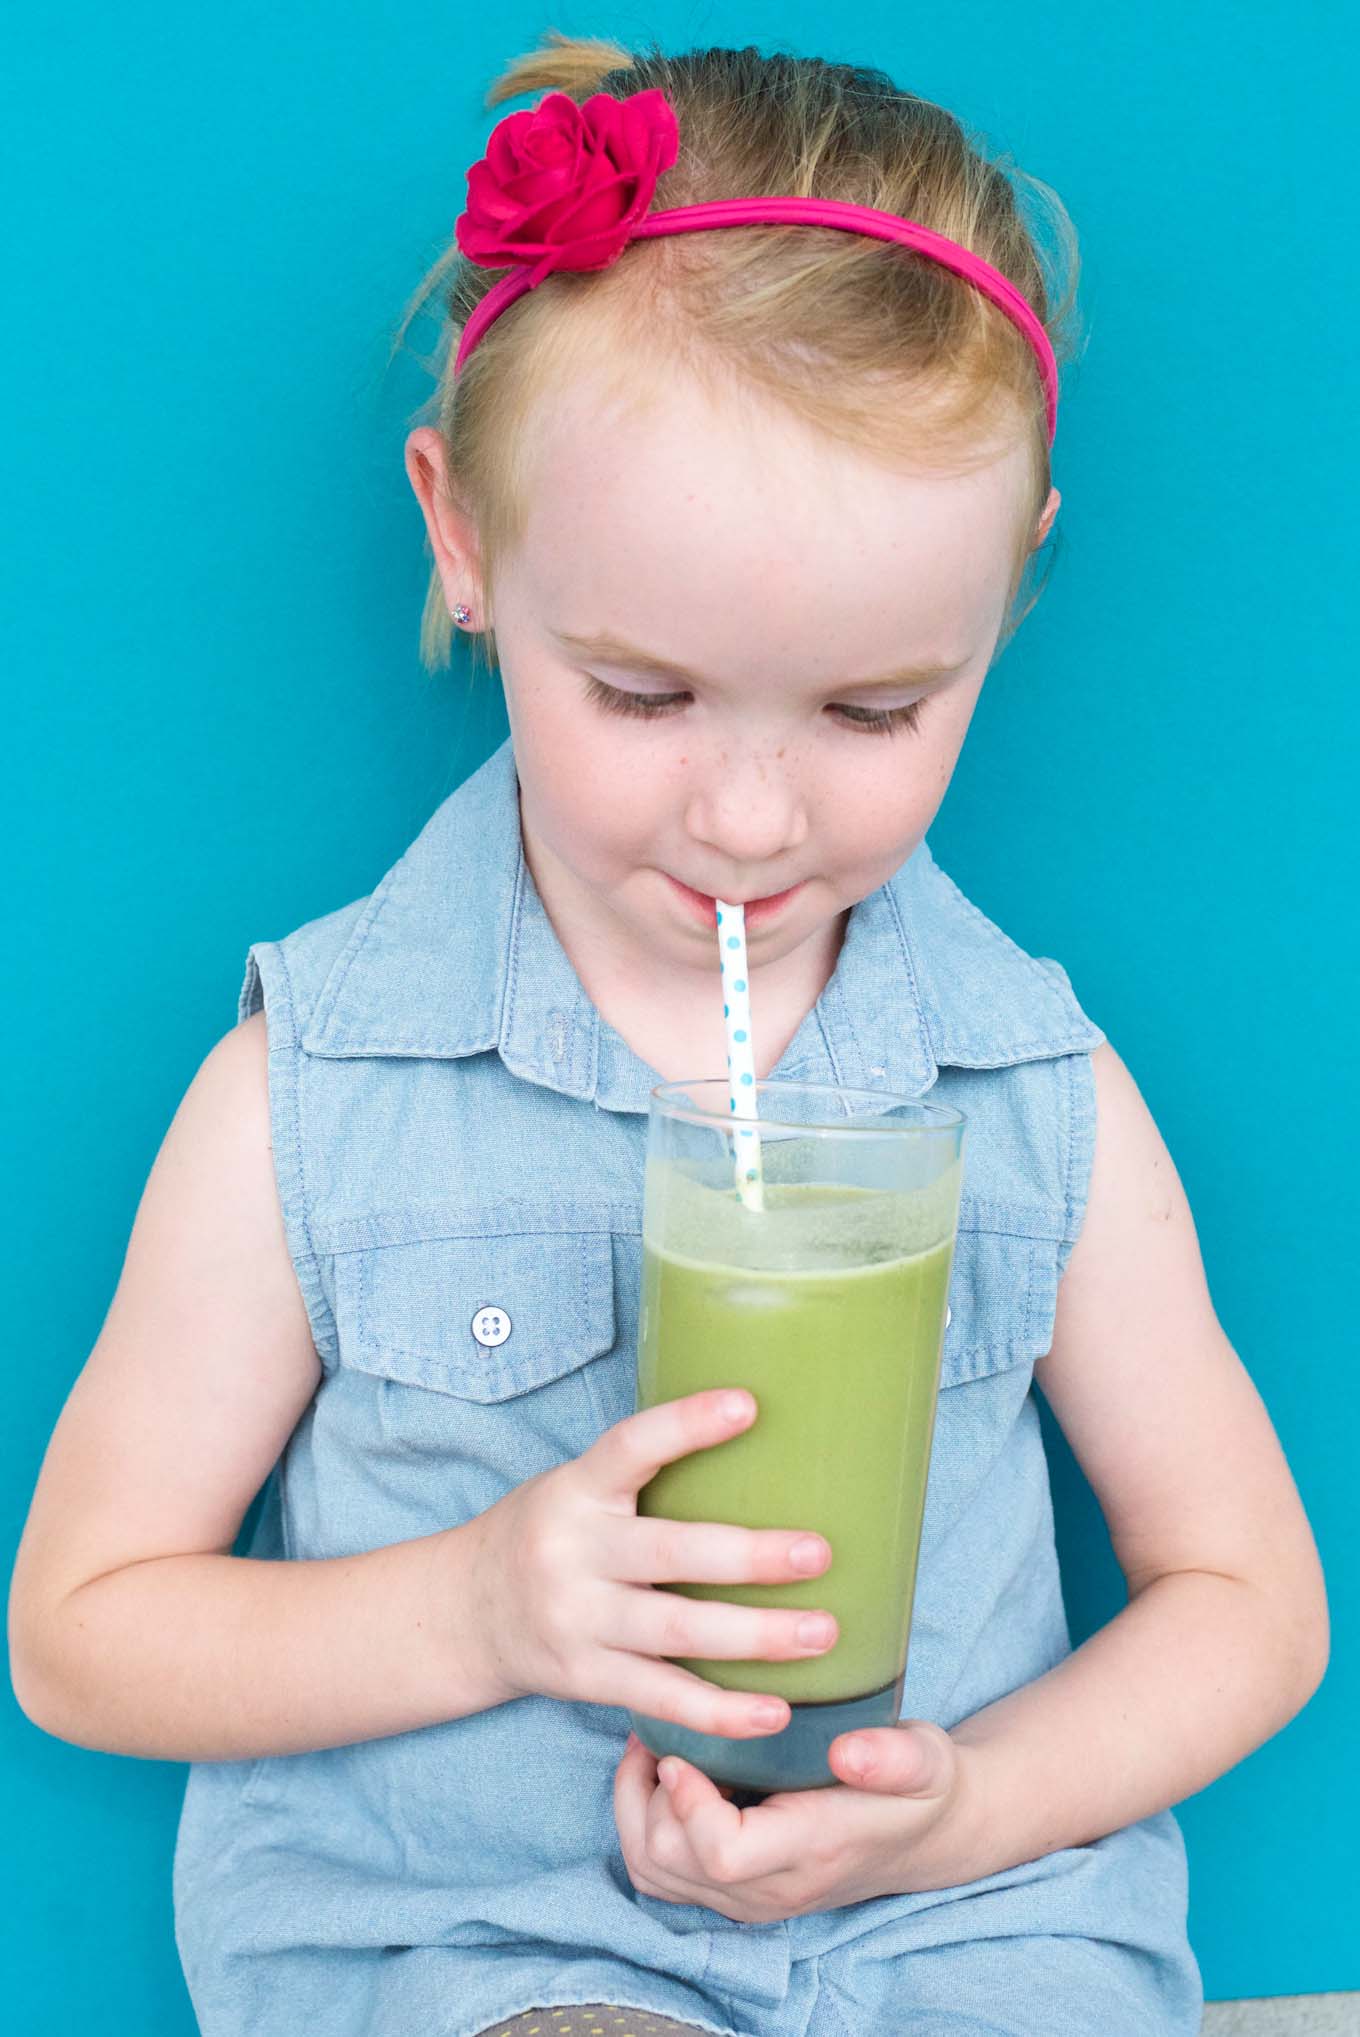 We all want a quick fix but is drinking your greens the answer?